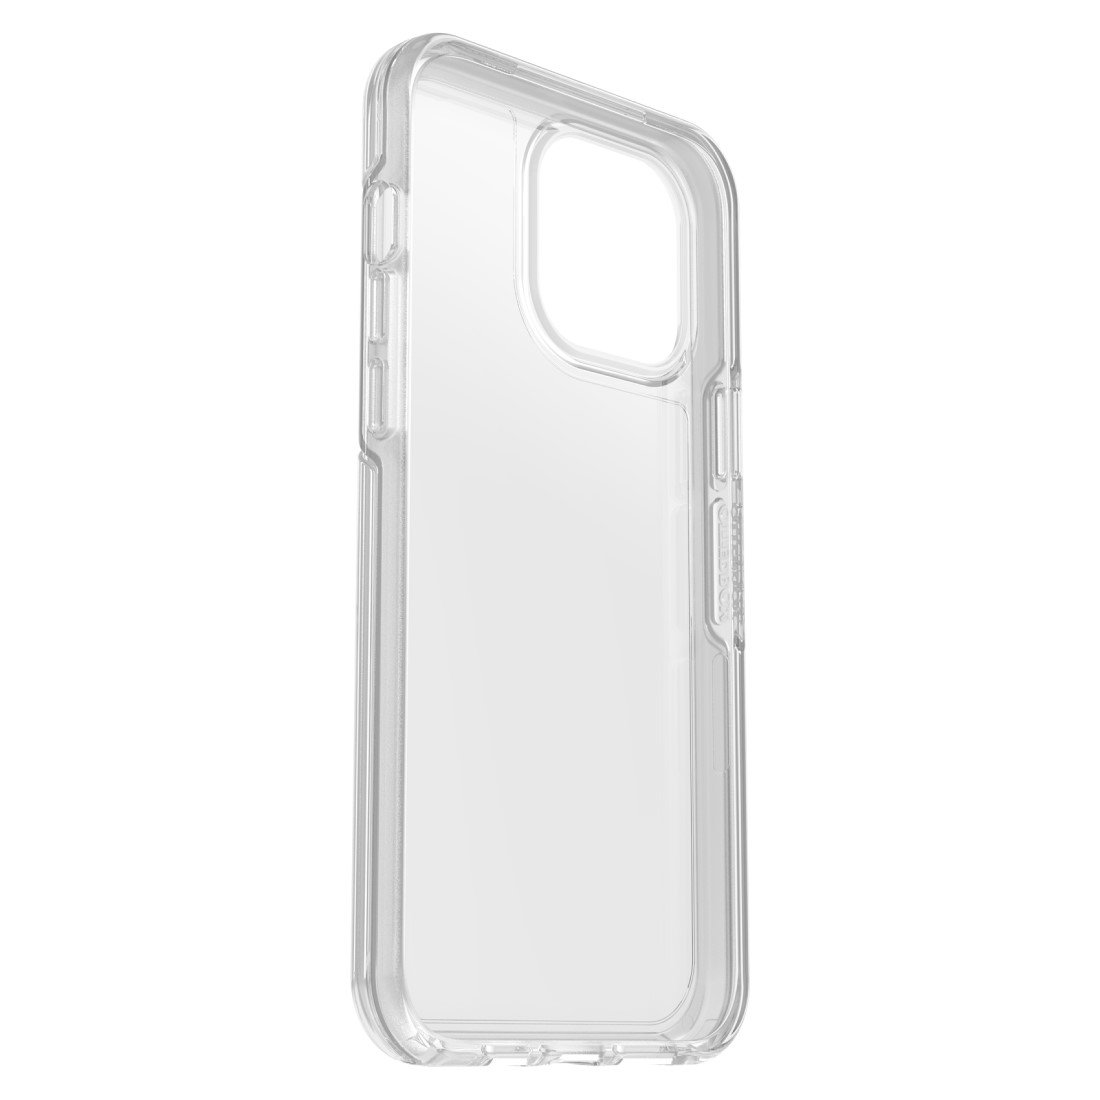 OTTERBOX IPHONE 13 PRO MAX SYMMETRY CLEAR CASE (CLEAR) | OTTERBOX